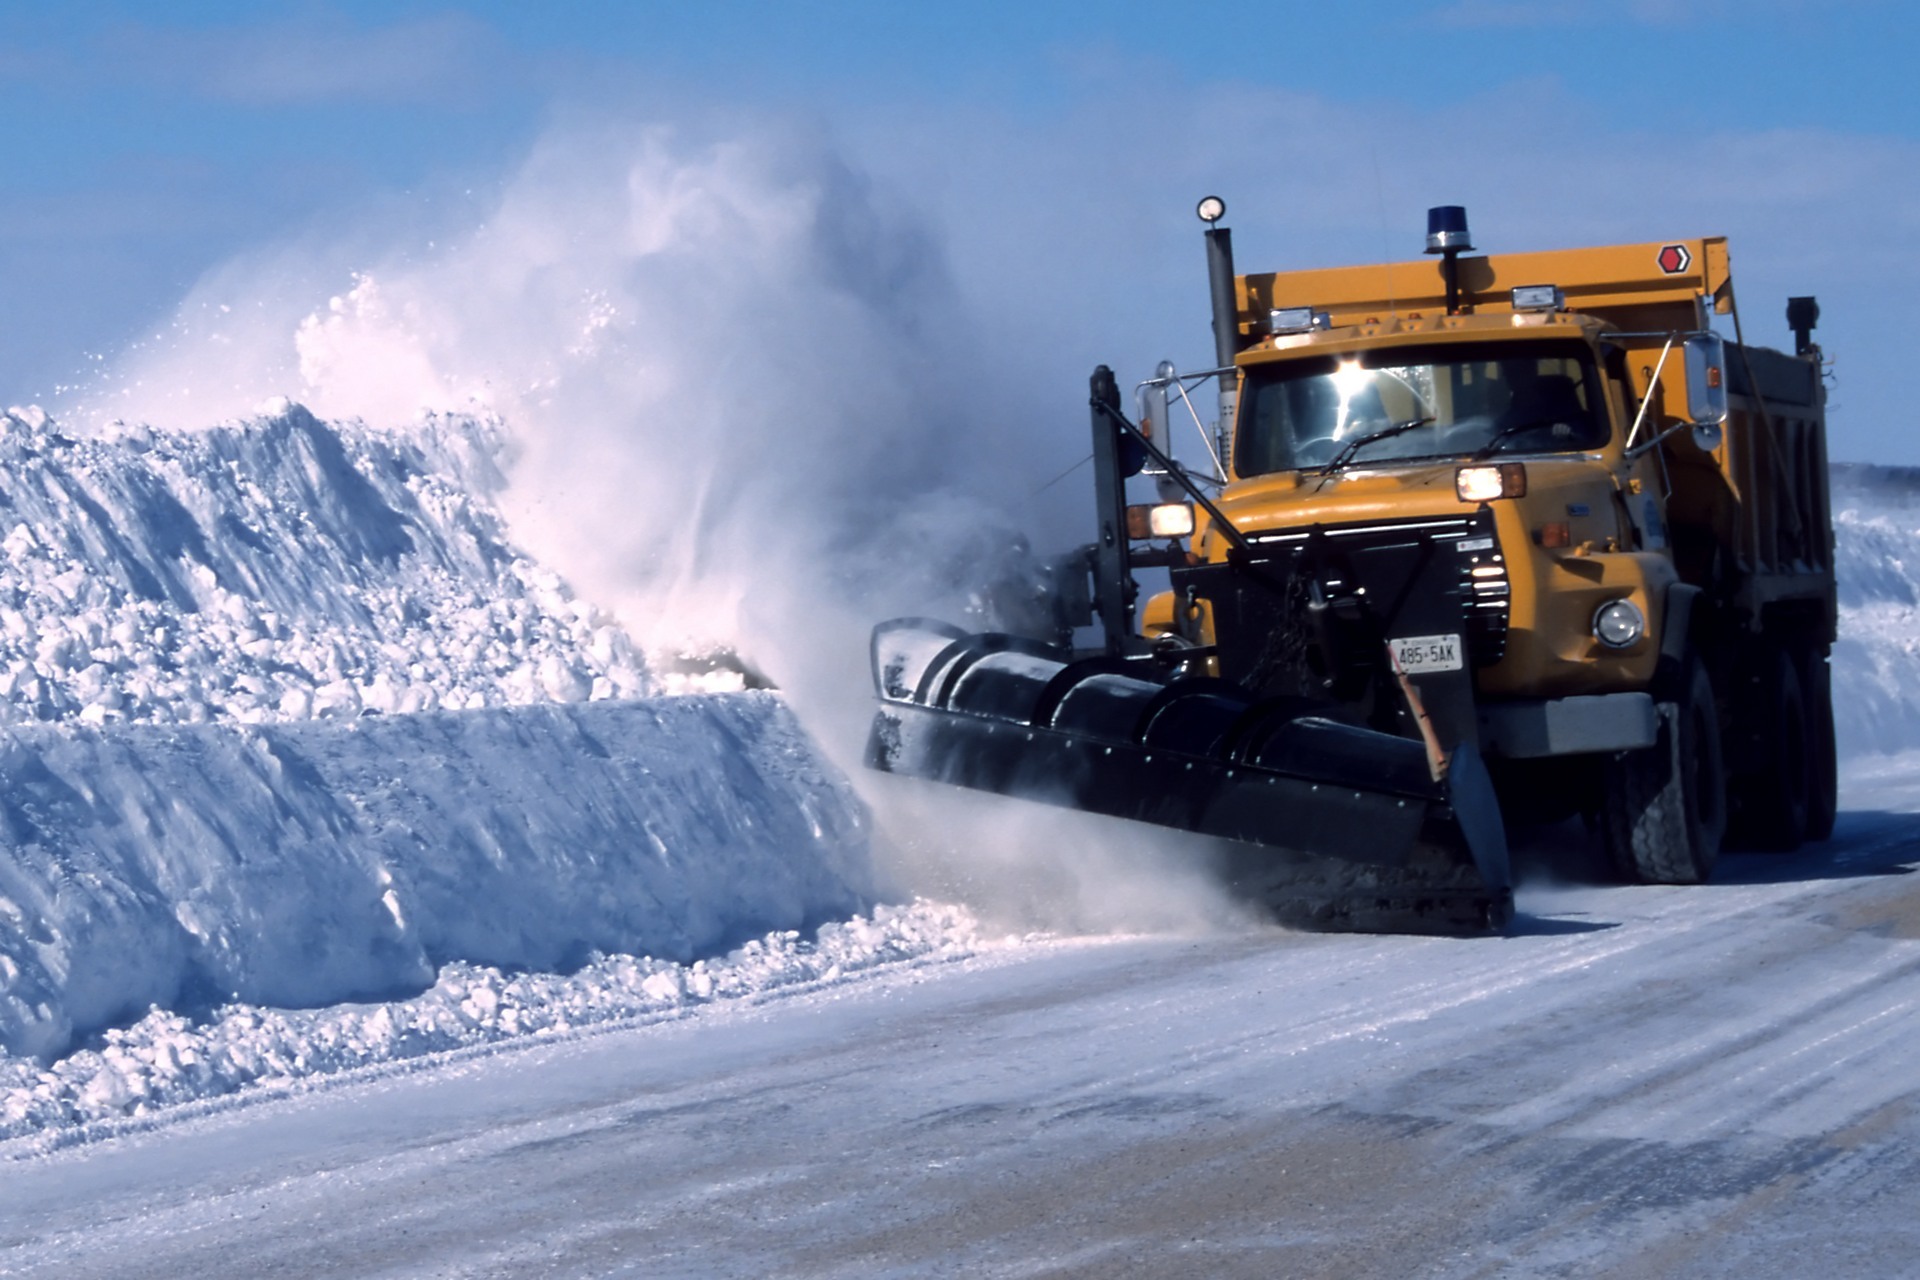 How technology is helping with snow removal from roads